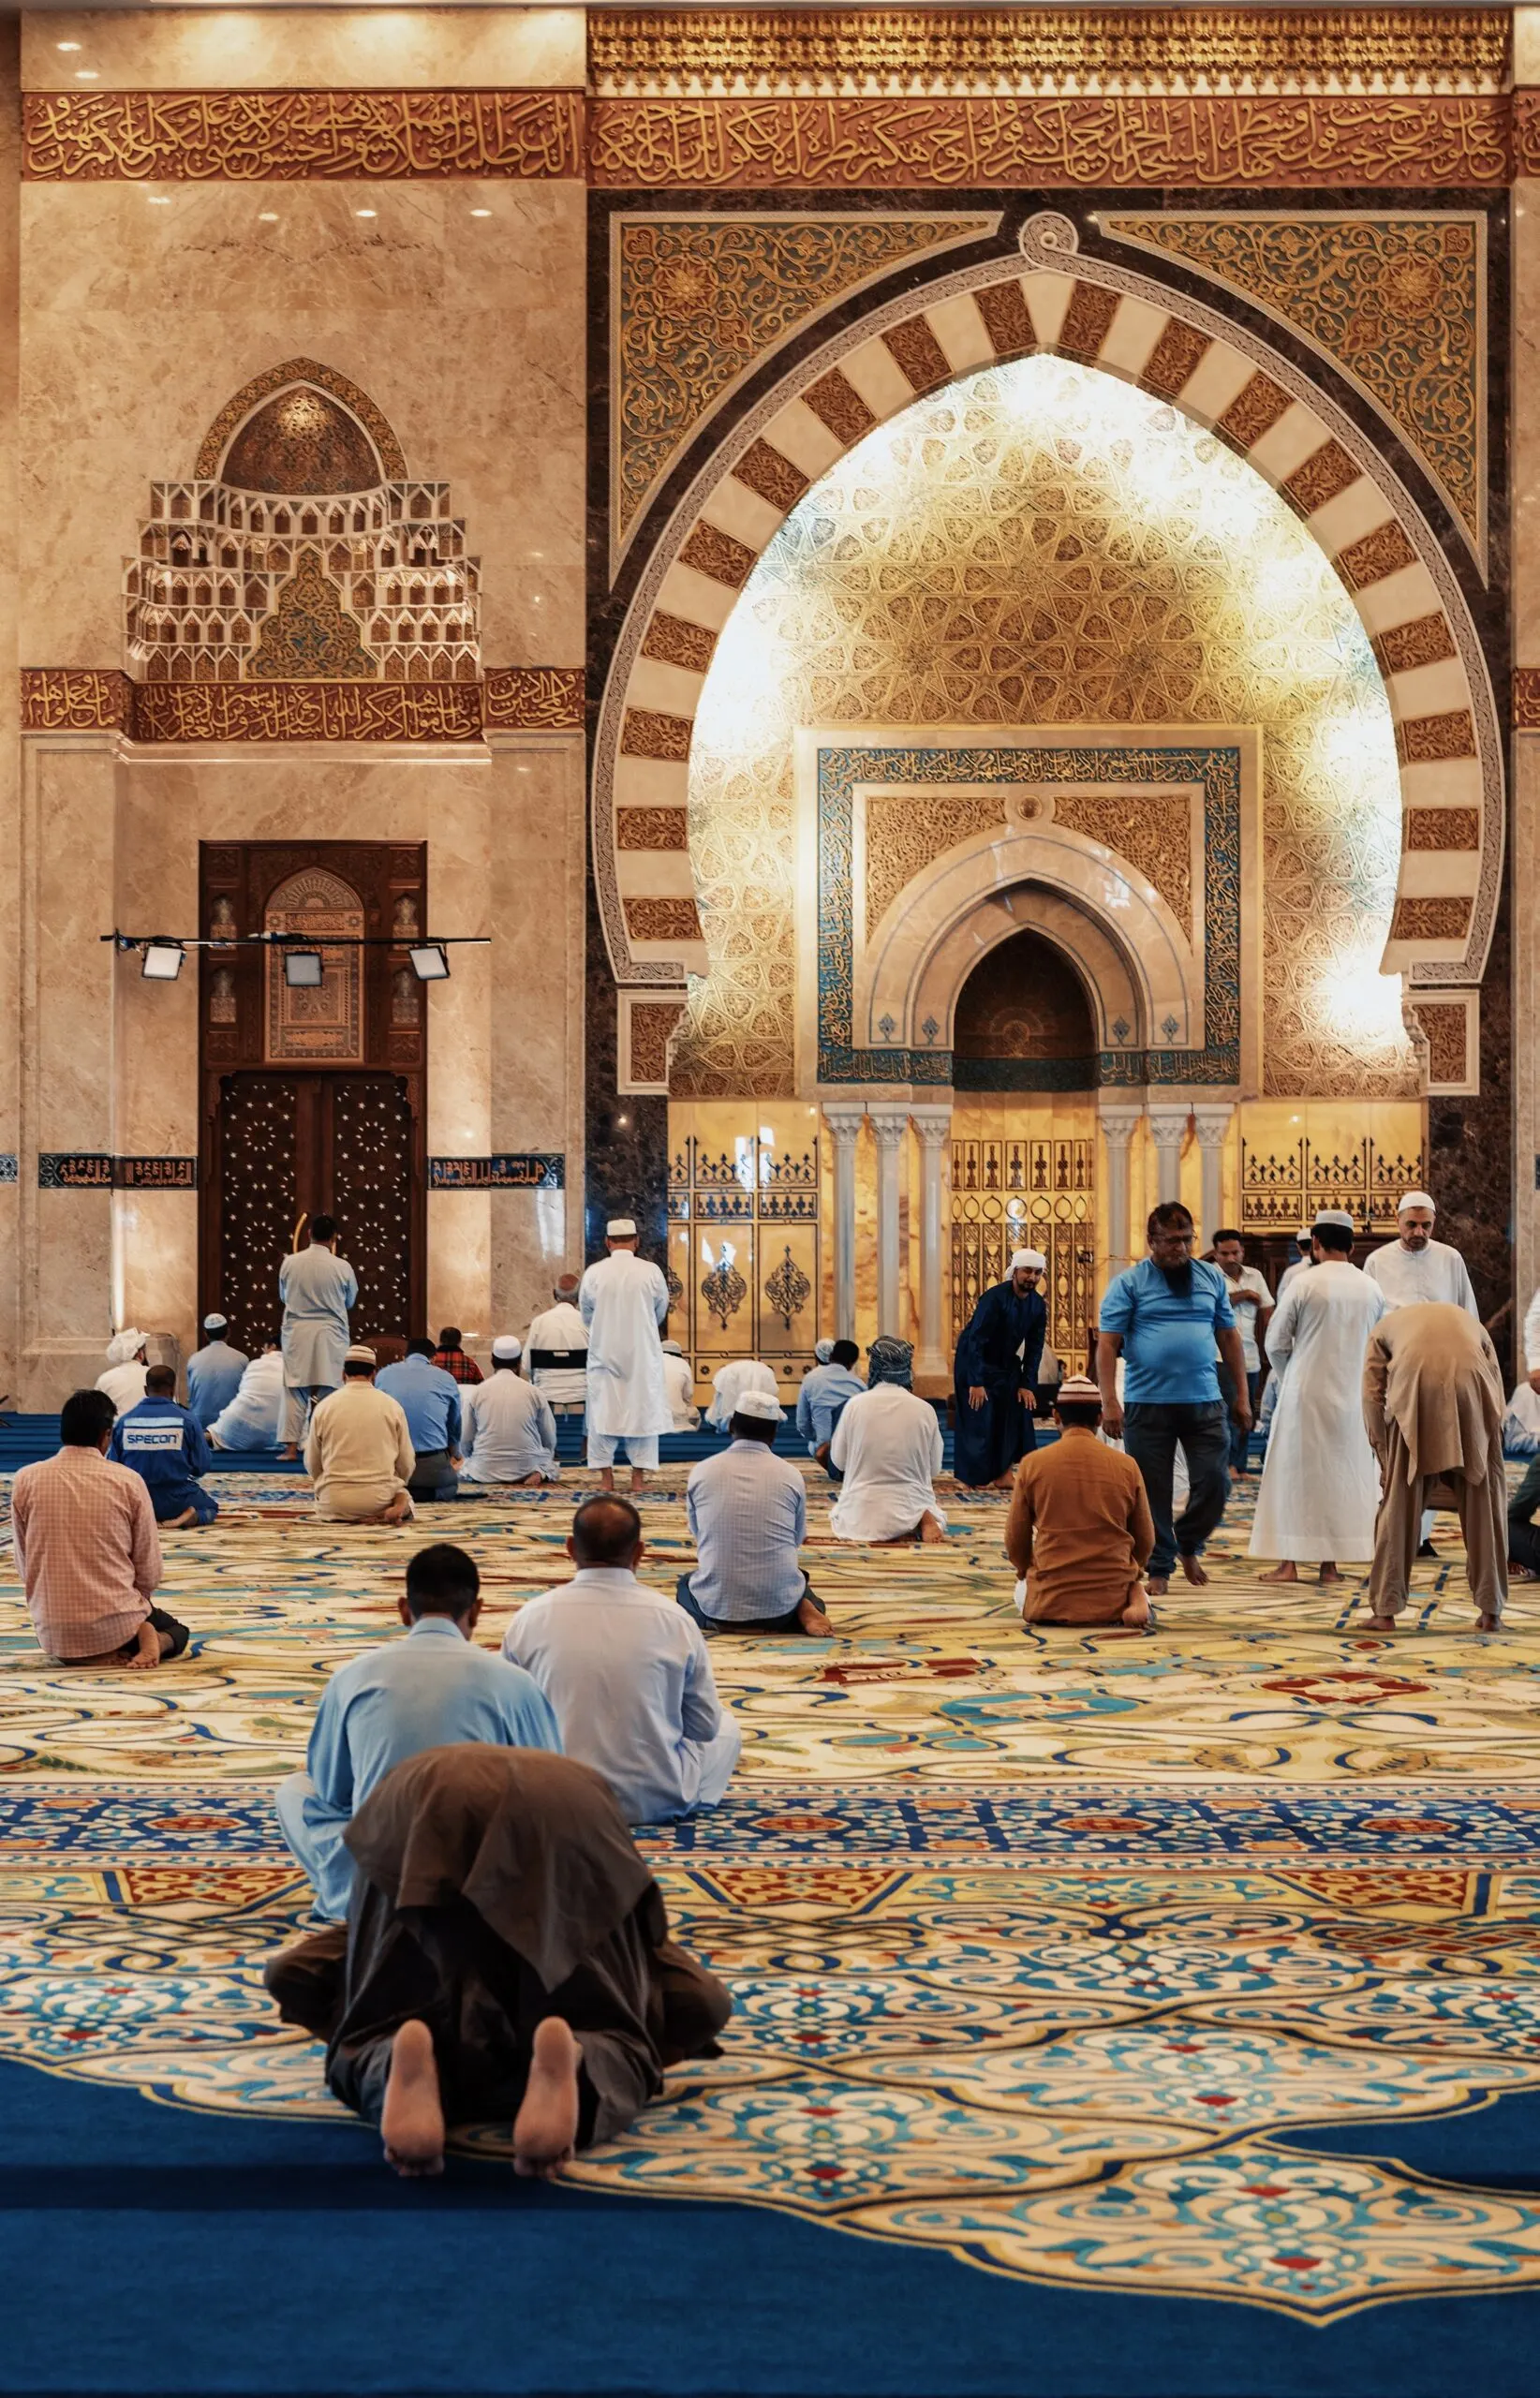 men kneeling and bowing inside a mosque